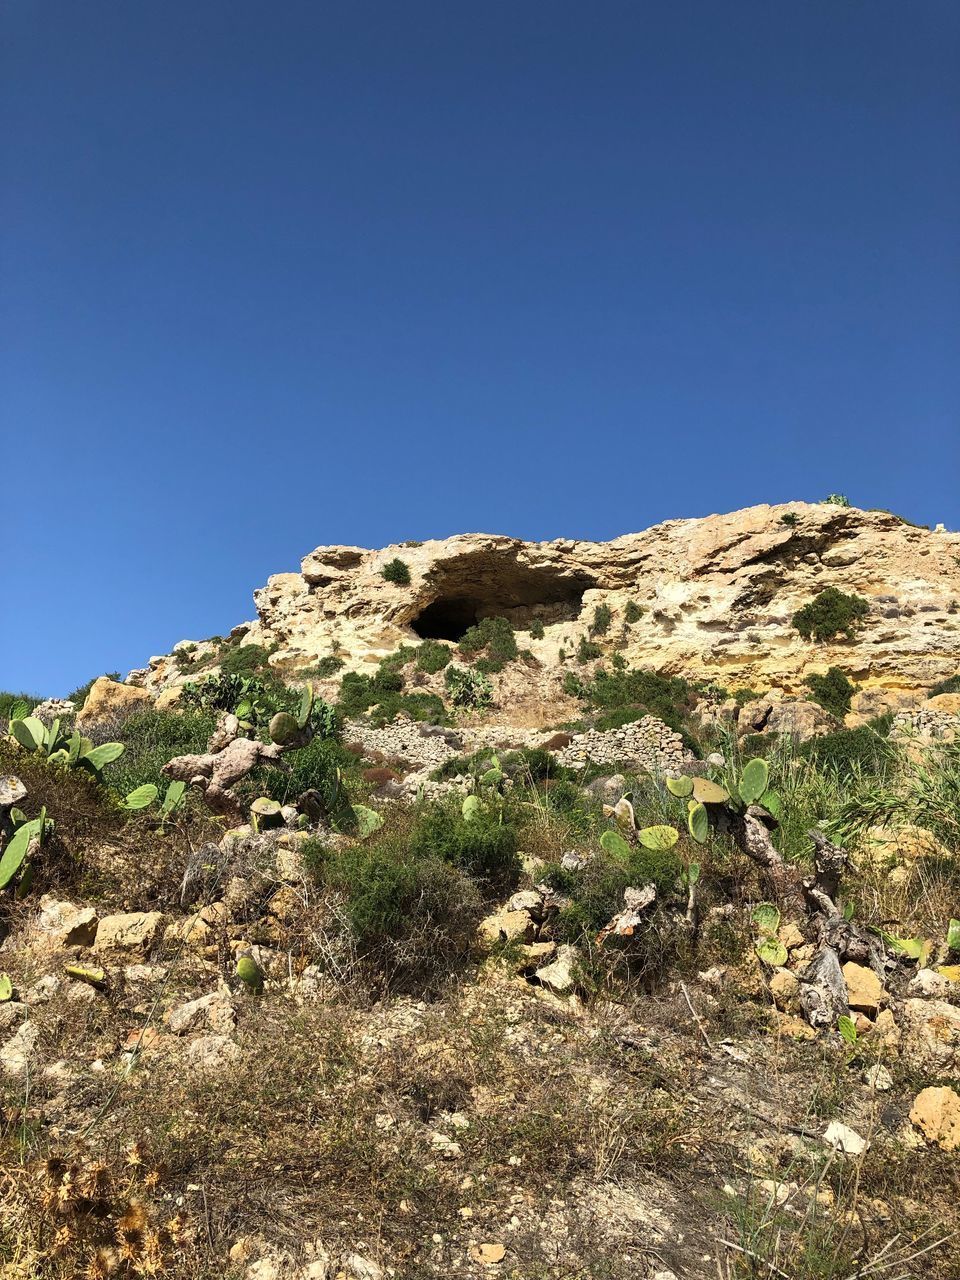 LOW ANGLE VIEW OF ROCK AGAINST CLEAR BLUE SKY